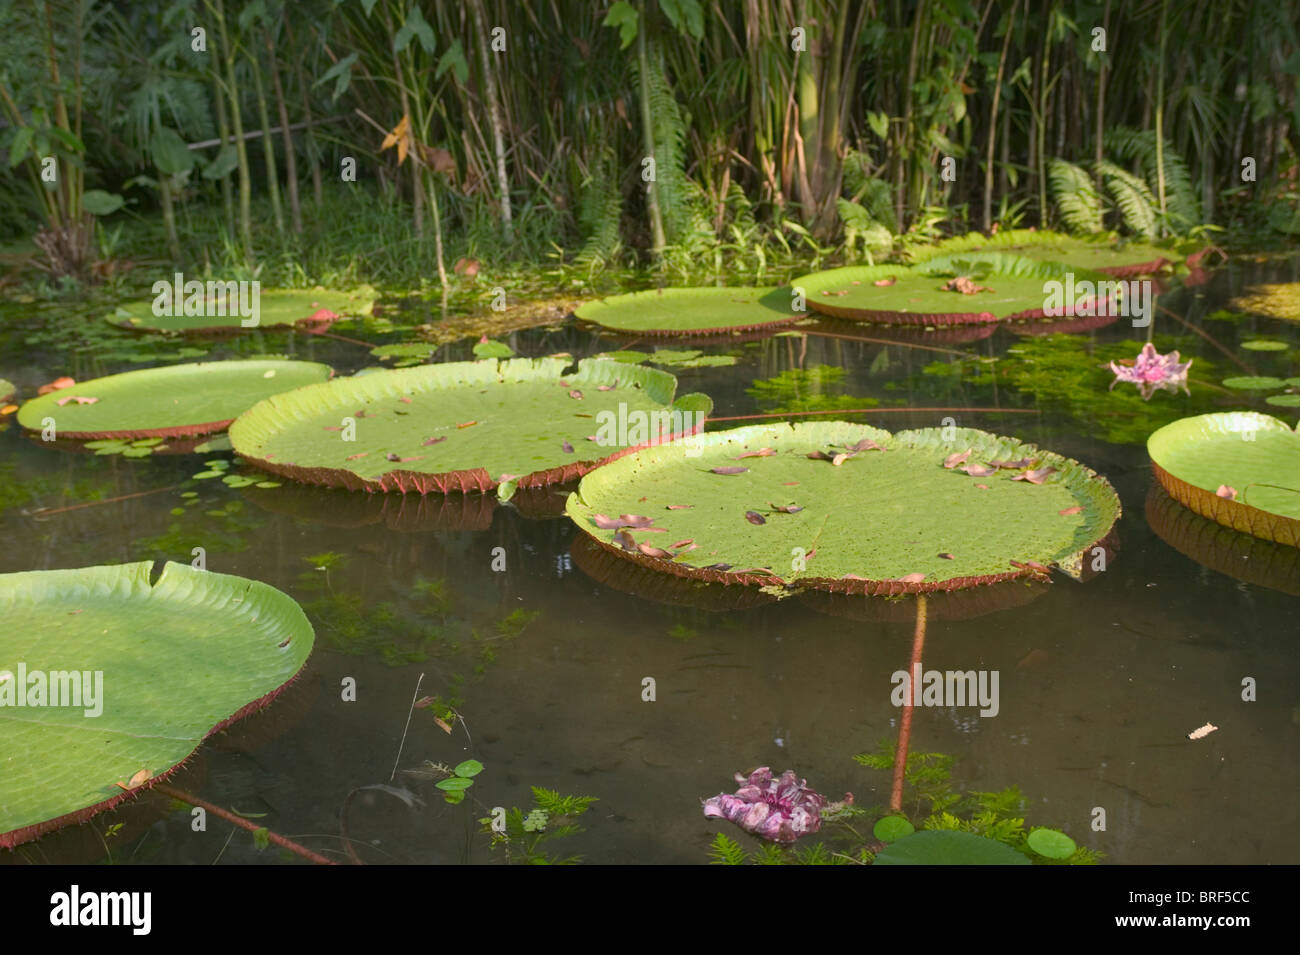 South America, Brazil, View of victoria water lily leaf floating on pond water Stock Photo